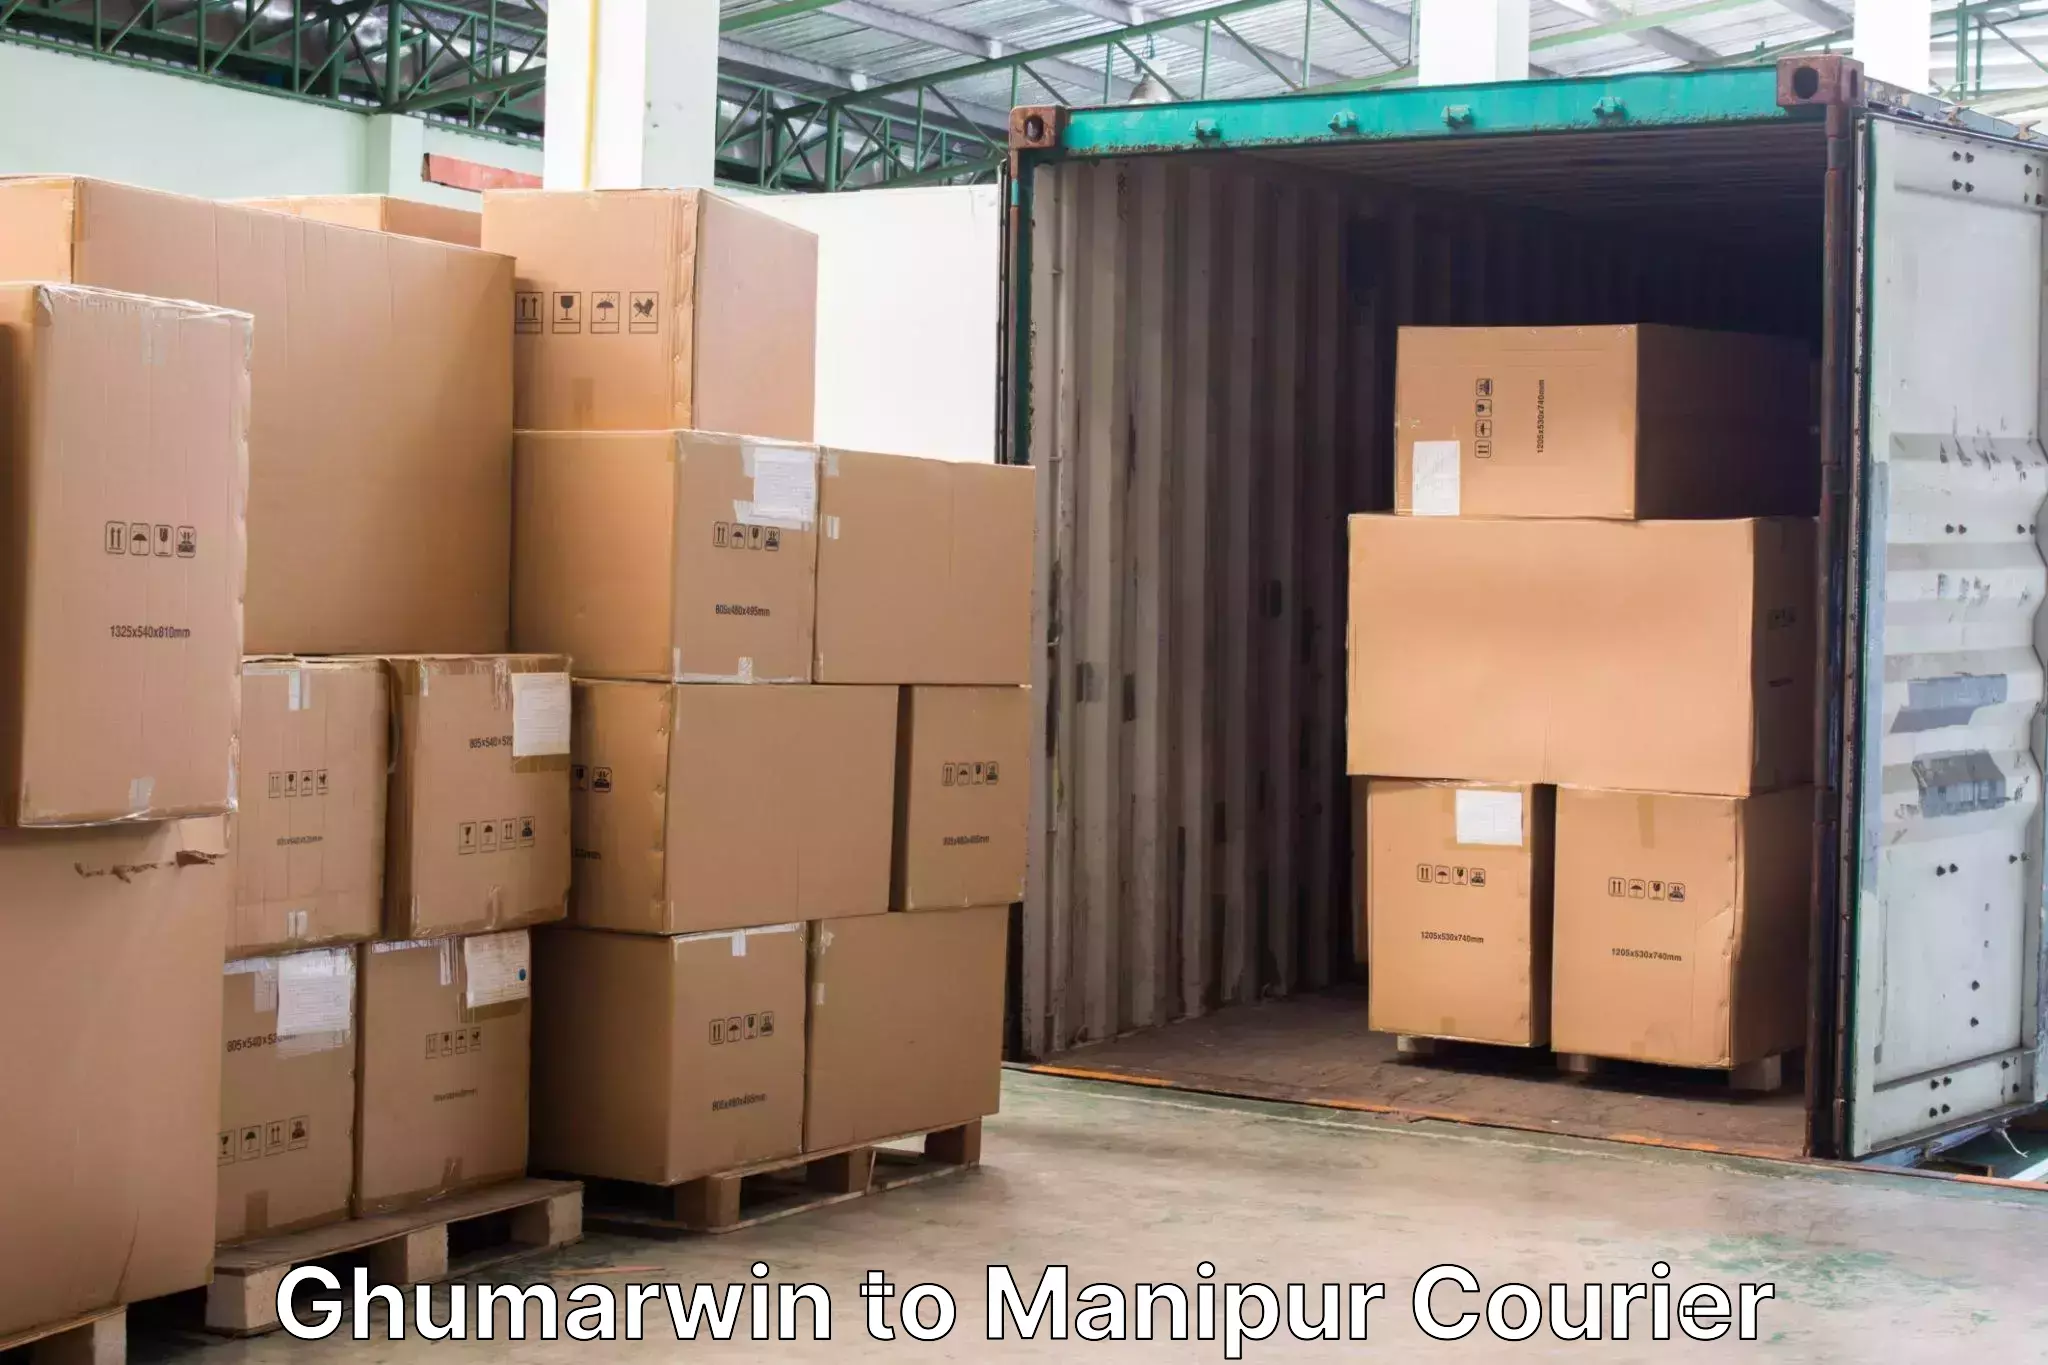 Urgent luggage shipment in Ghumarwin to Manipur